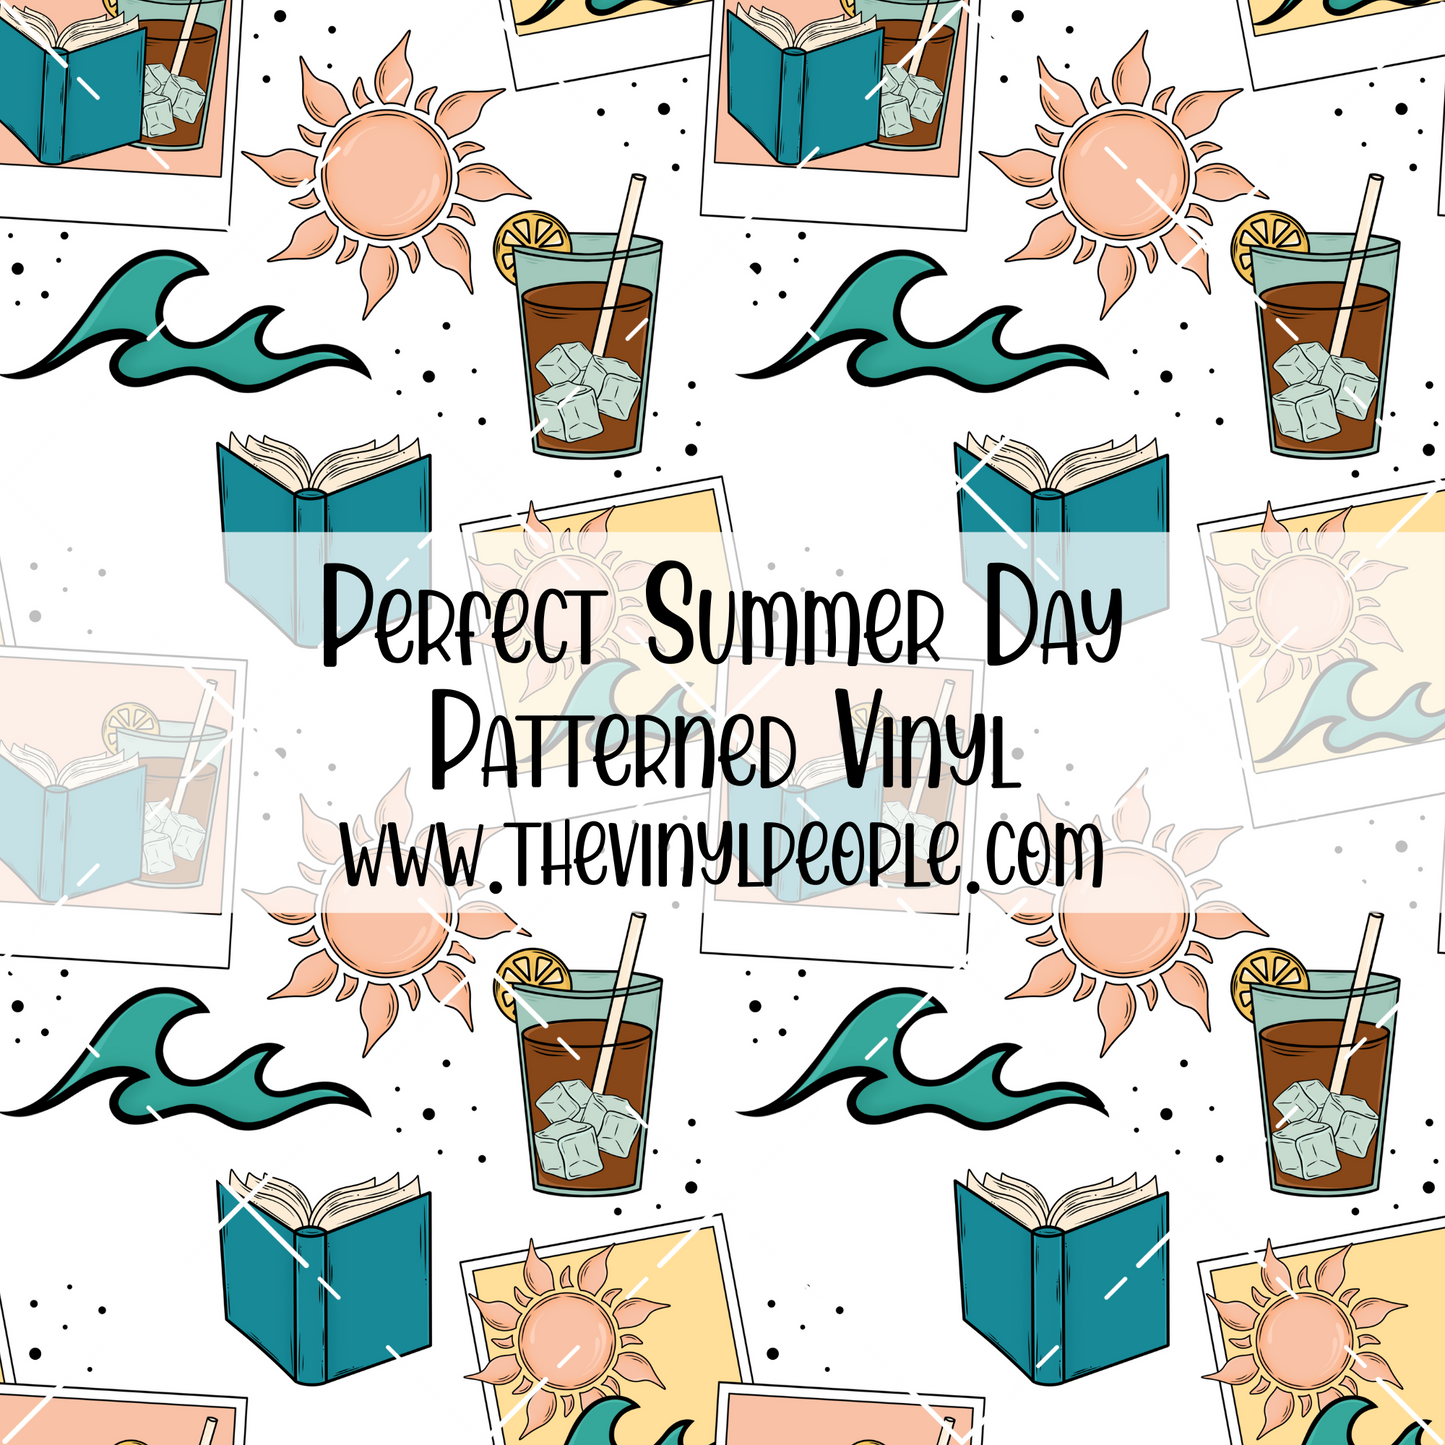 Perfect Summer Day Patterned Vinyl